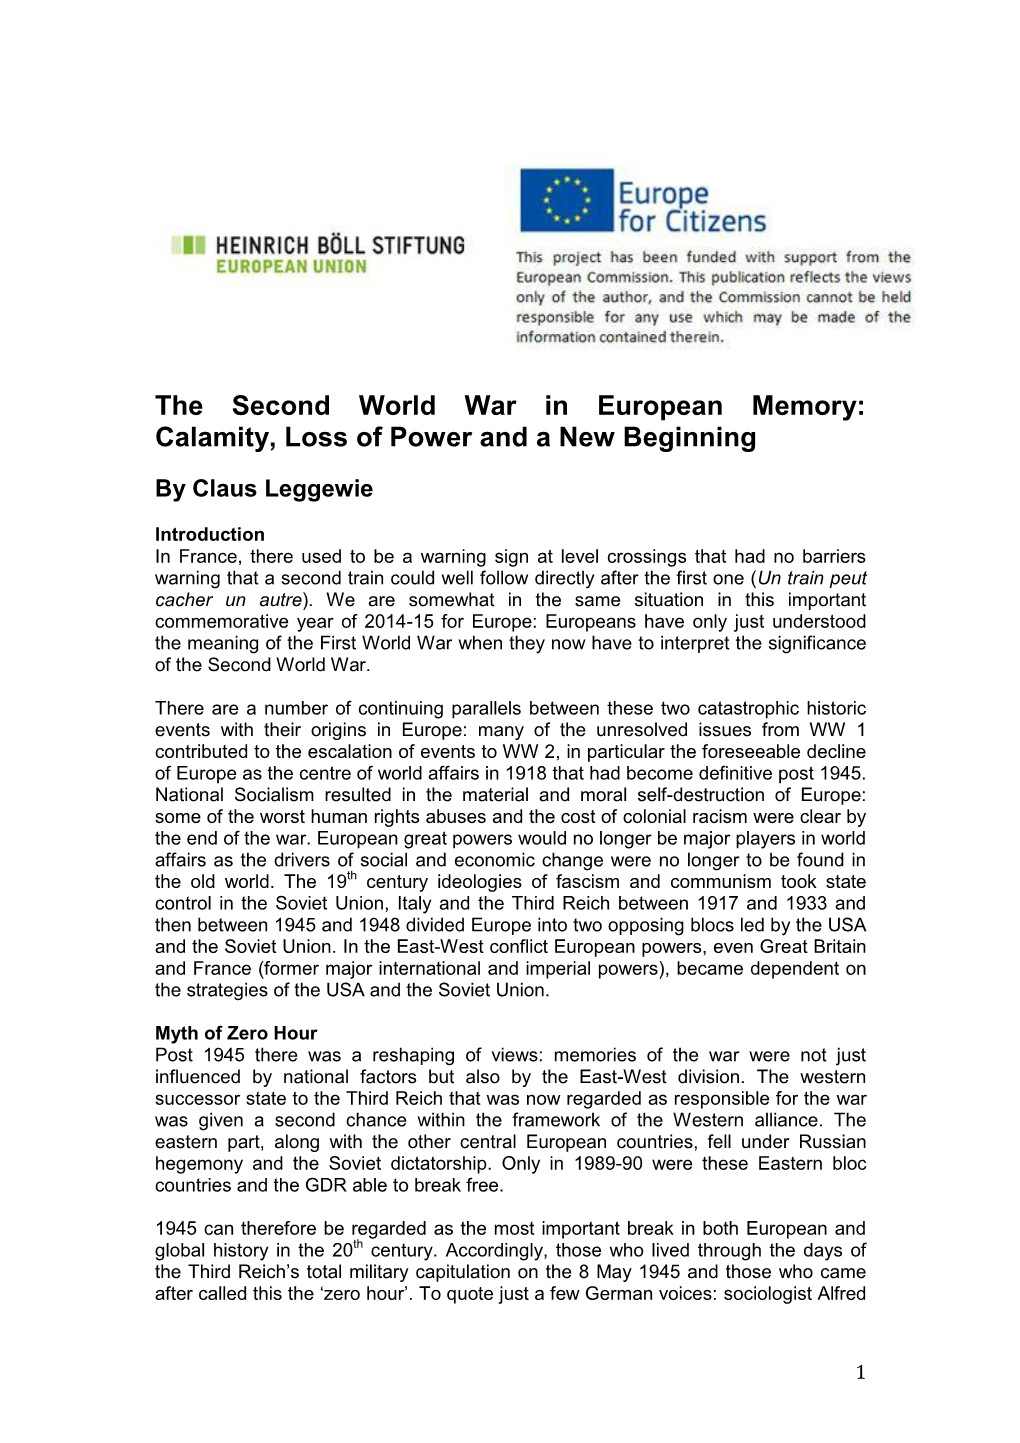 The Second World War in European Memory: Calamity, Loss of Power and a New Beginning